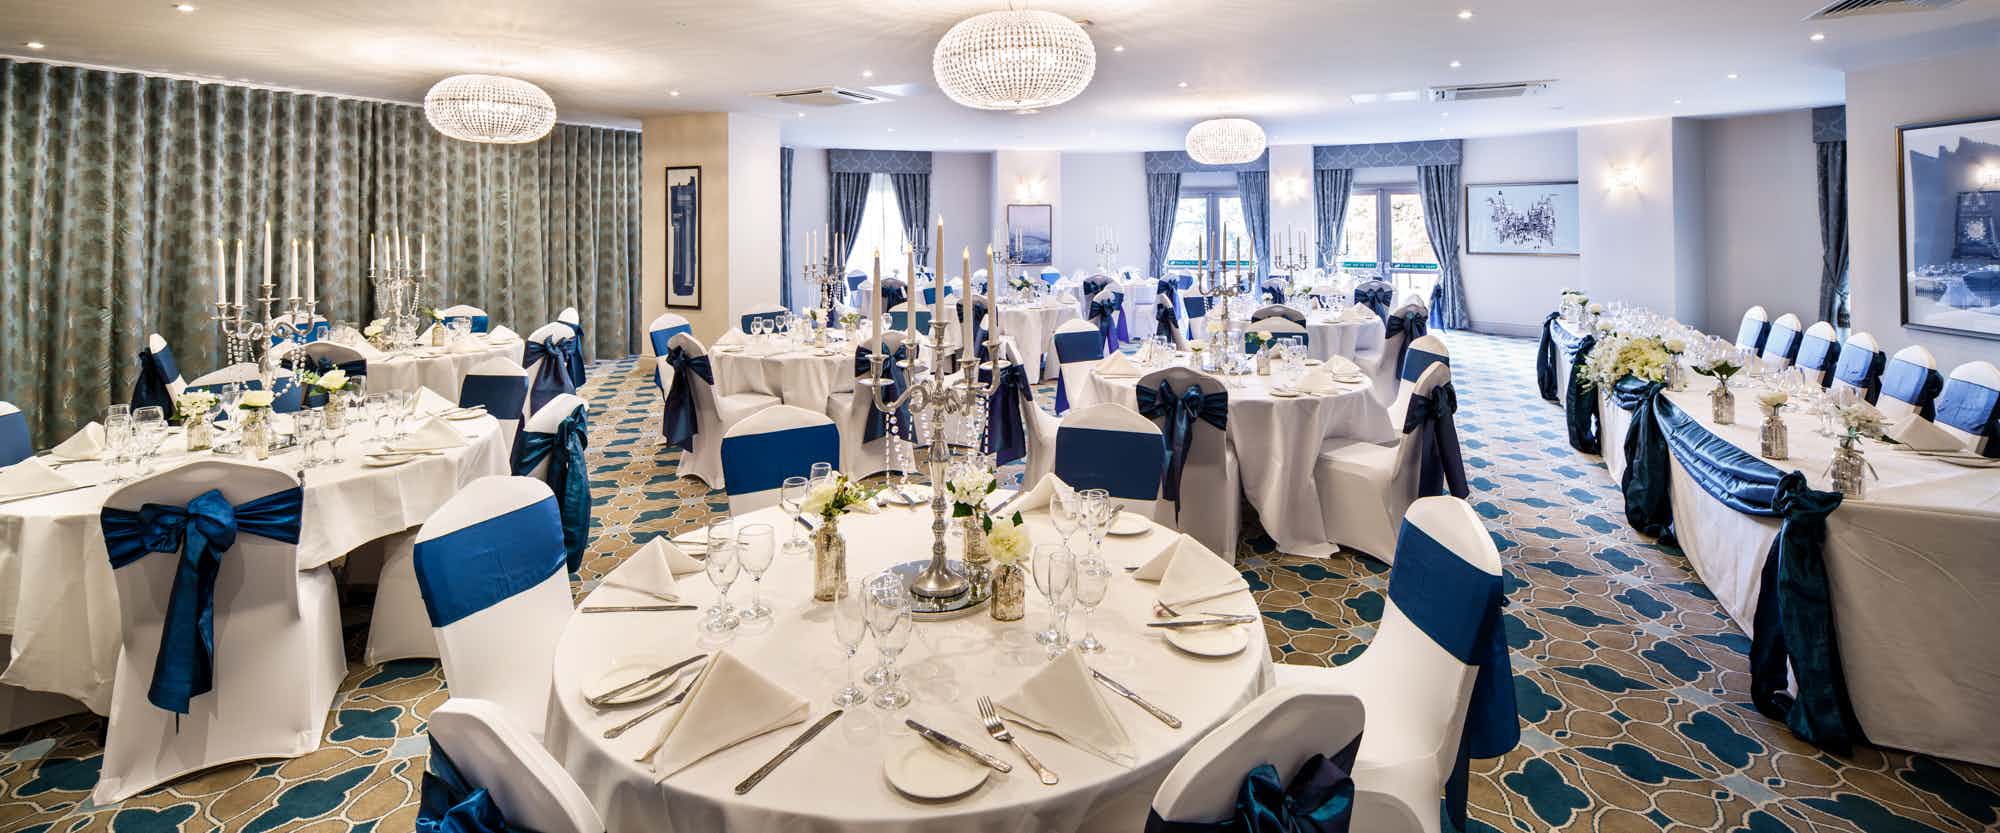 THE CHRISTLETON SUITE, Mercure Chester Abbots Well Hotel